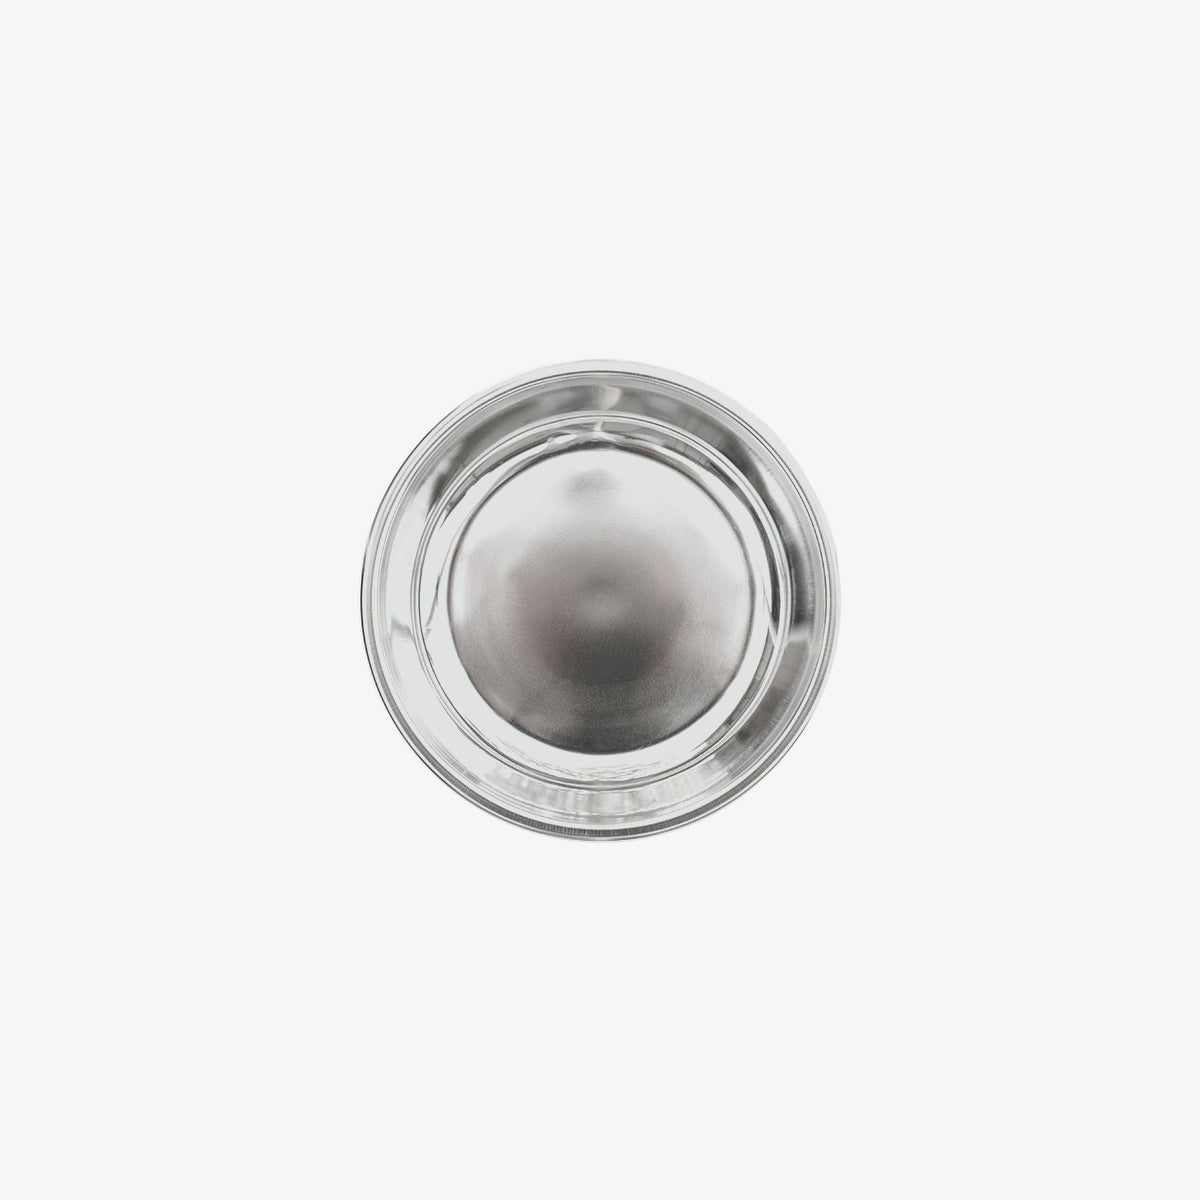 Extra Stainless Steel Bowl - Ono